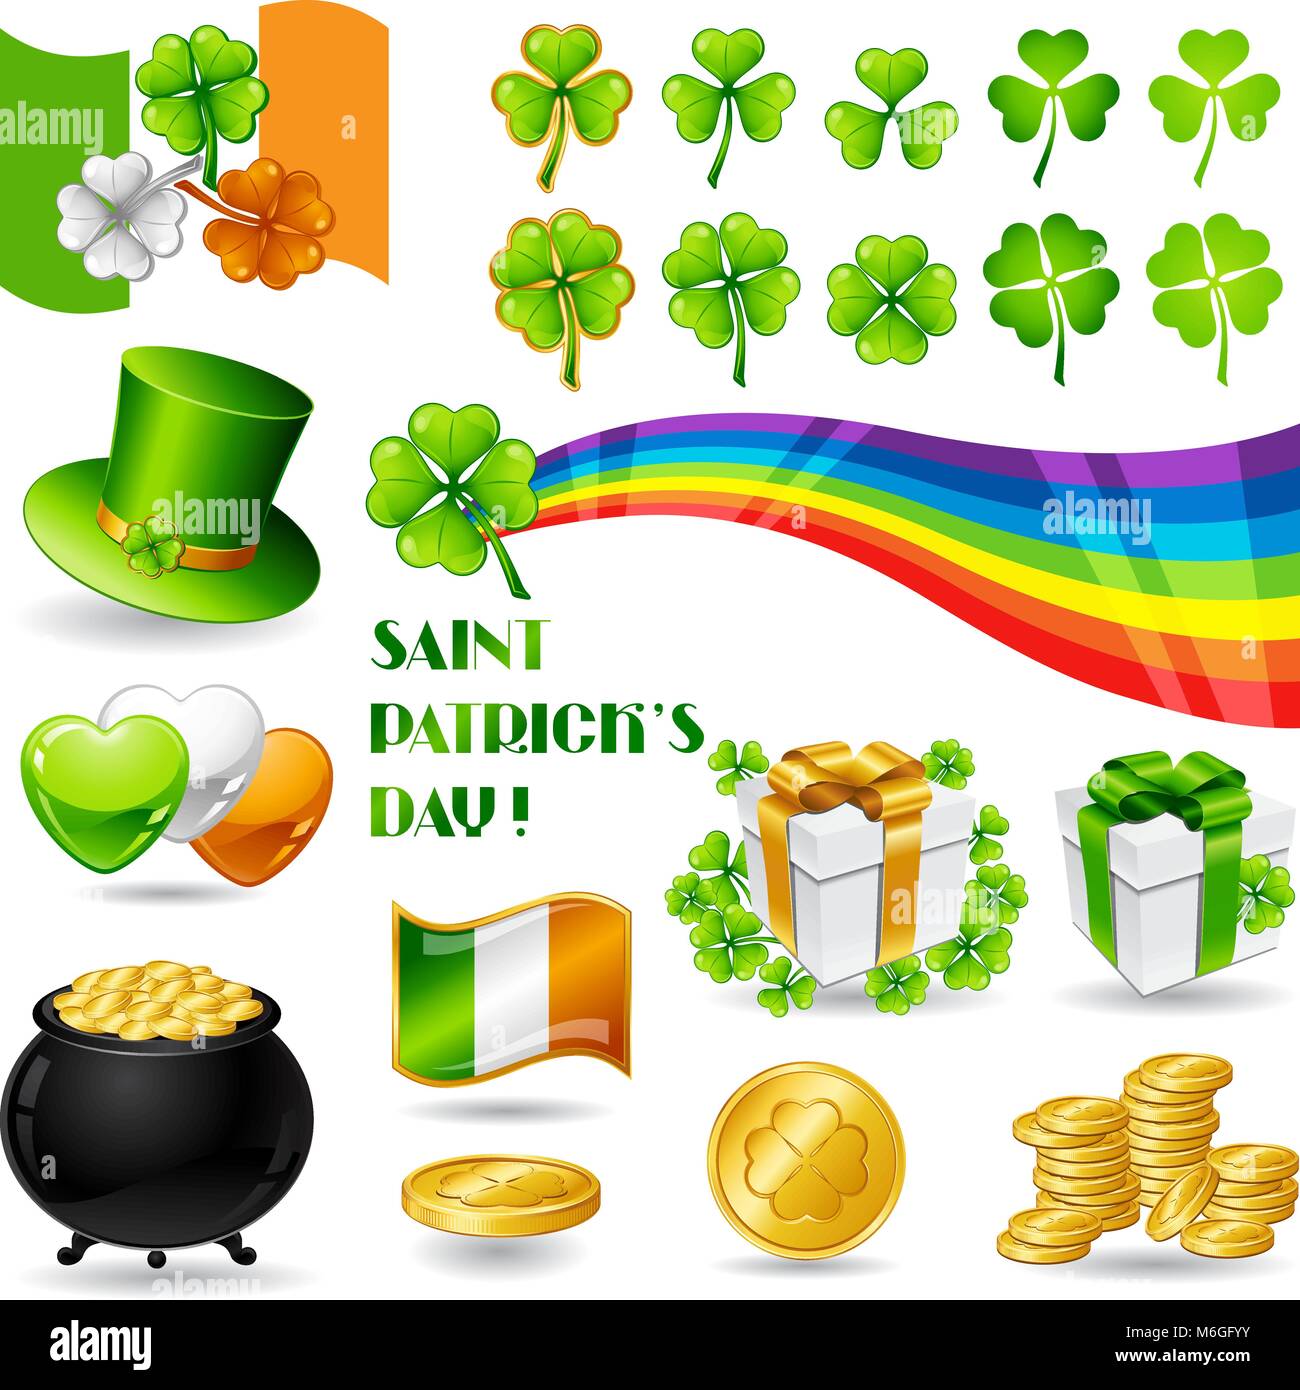 Collection illustrations of Saint Patrick's Day symbols Stock Vector